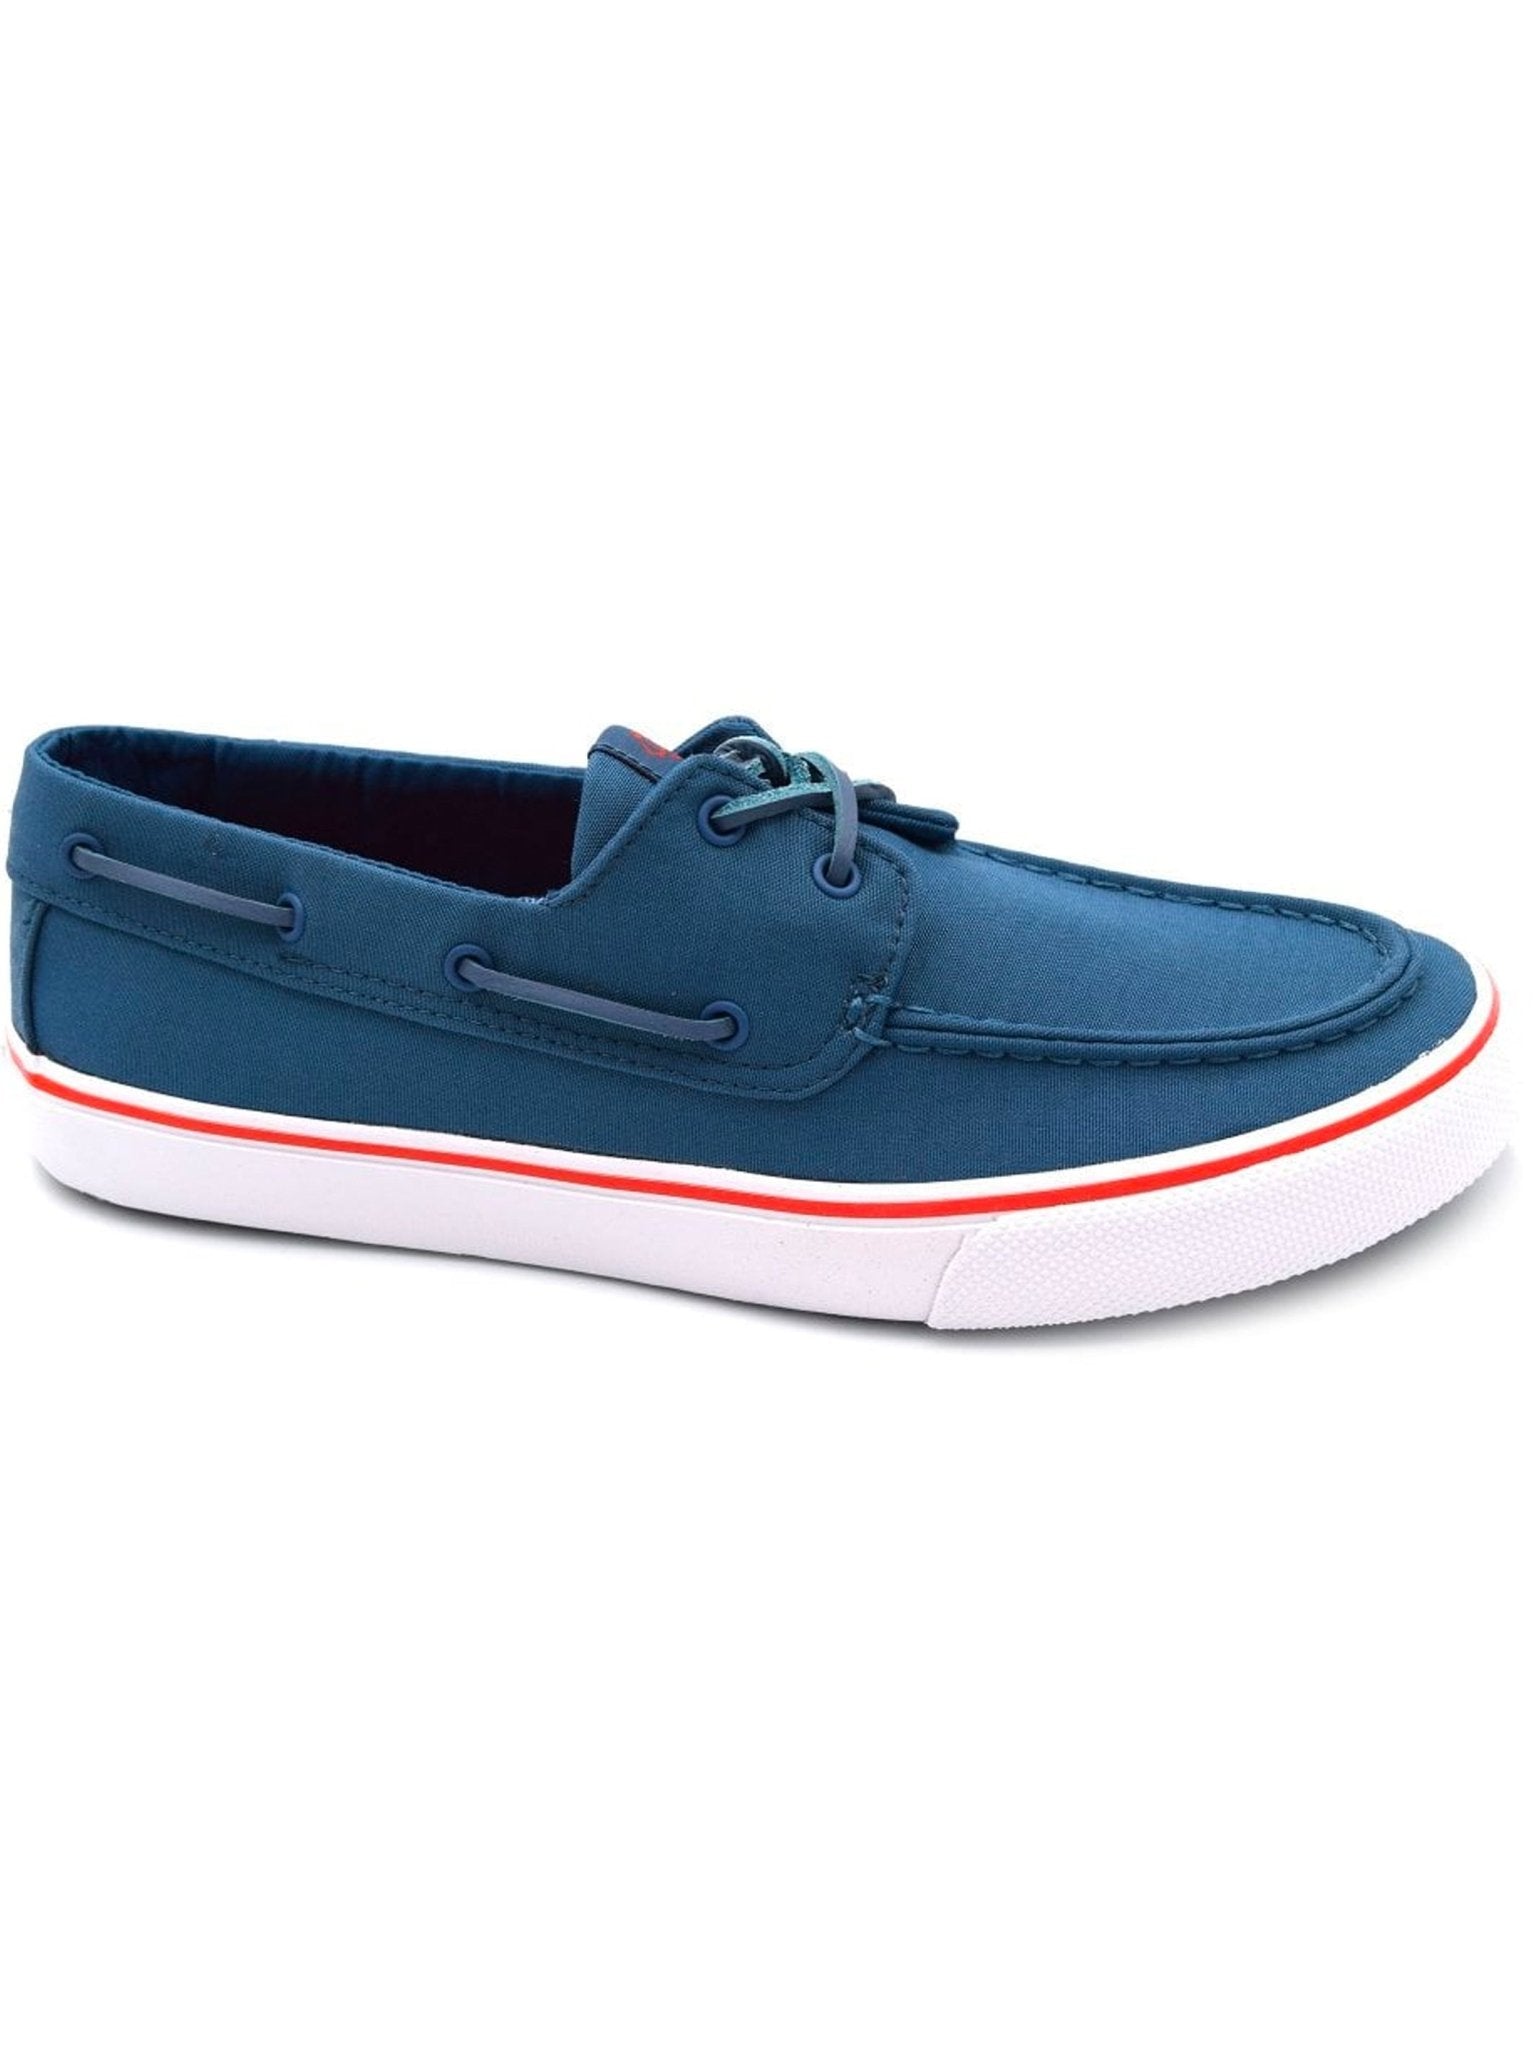 Sperry Sperry - Bahamas Seacycled Mens Boat Shoe / Sperry Deck shoe Shoes